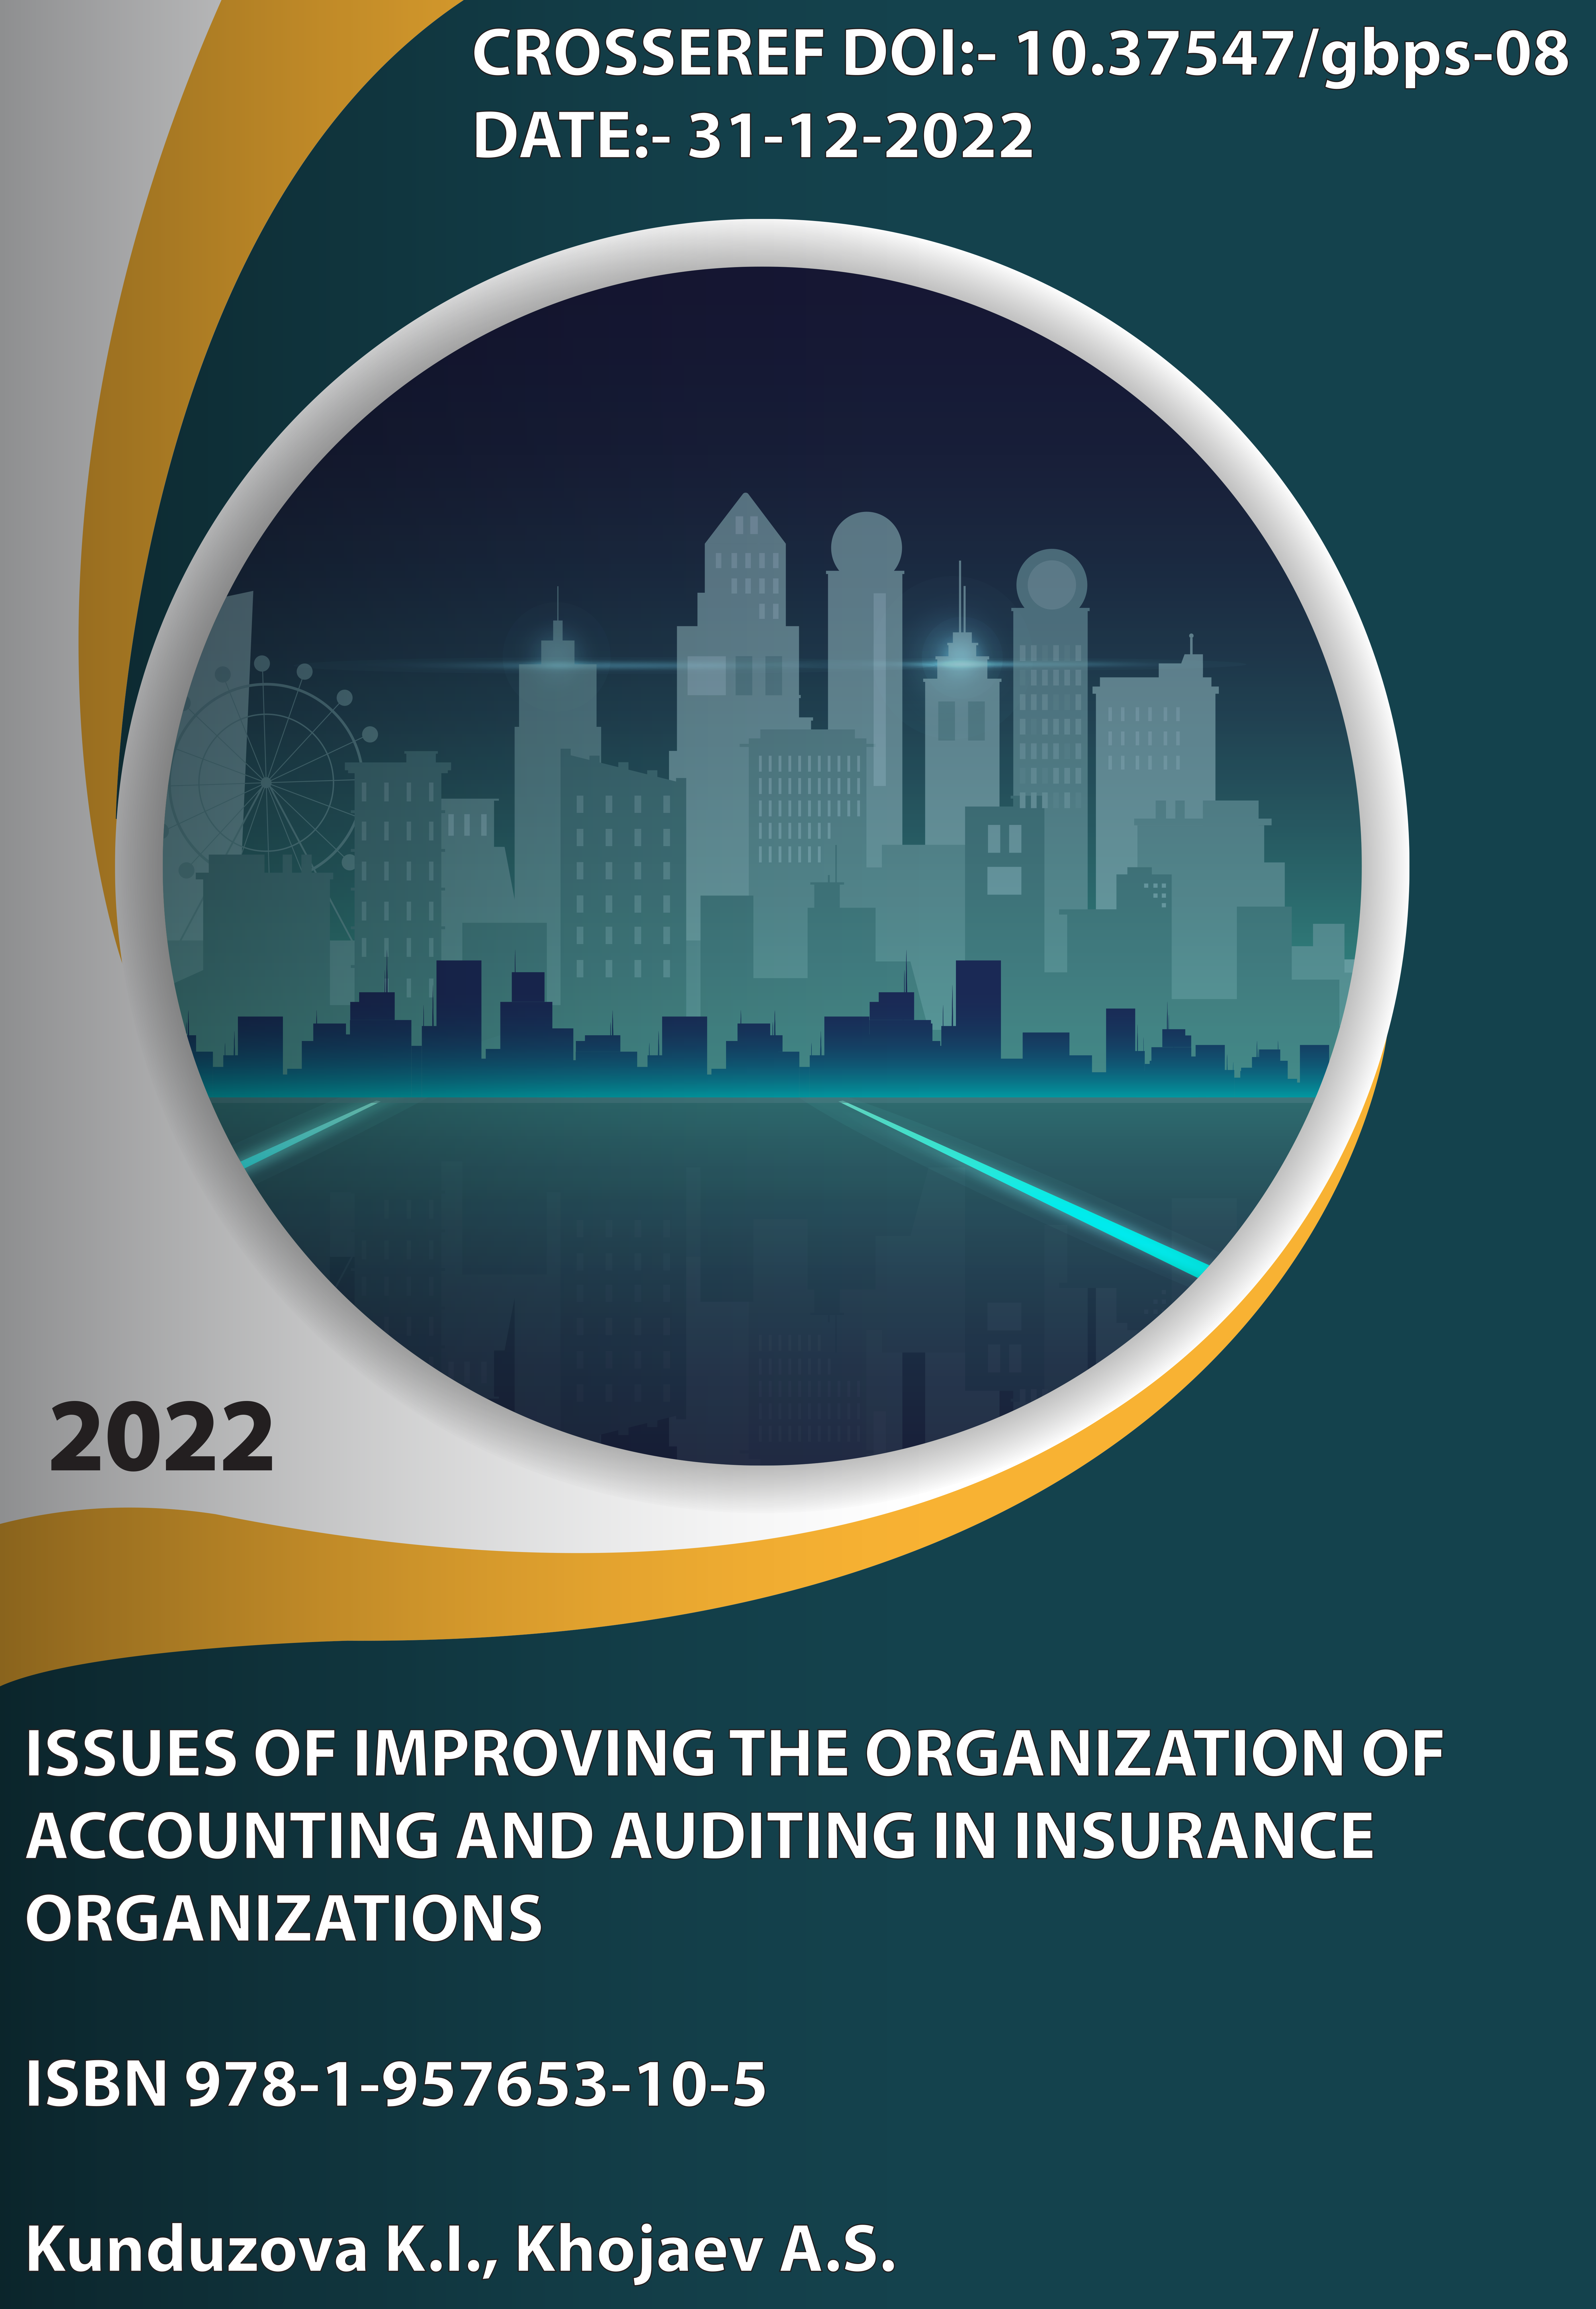 					View ISSUES OF IMPROVING THE ORGANIZATION OF ACCOUNTING AND AUDITING IN INSURANCE ORGANIZATIONS
				